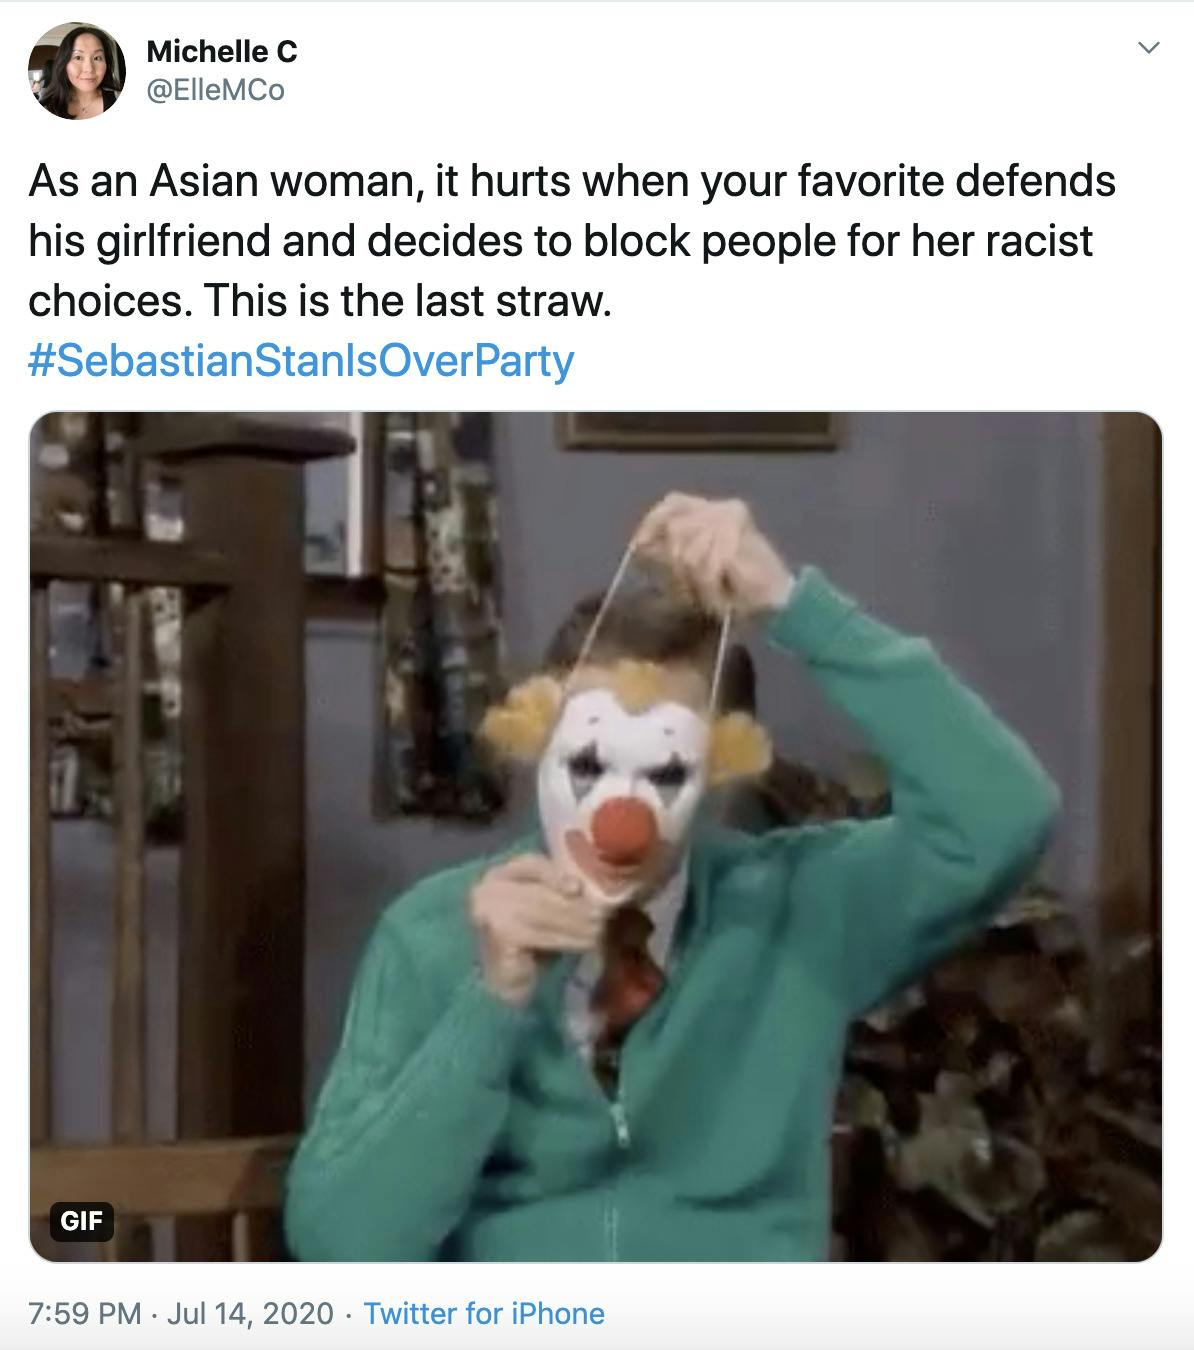 "As an Asian woman, it hurts when your favorite defends his girlfriend and decides to block people for her racist choices. This is the last straw. #SebastianStanIsOverParty" gif of Mr. Rogers putting on a clown mask